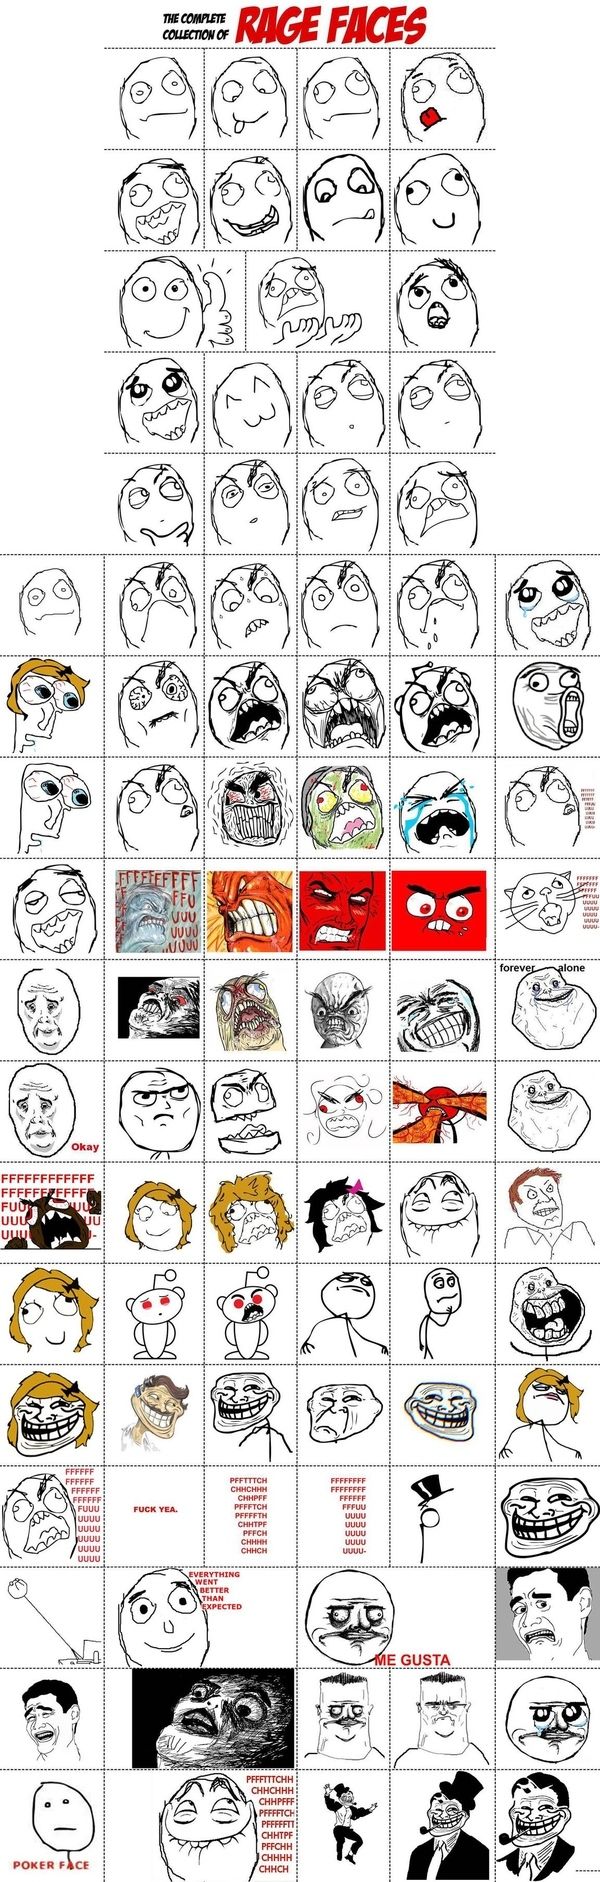 THE COMPLETE COLLECTION OF RAGE FACES